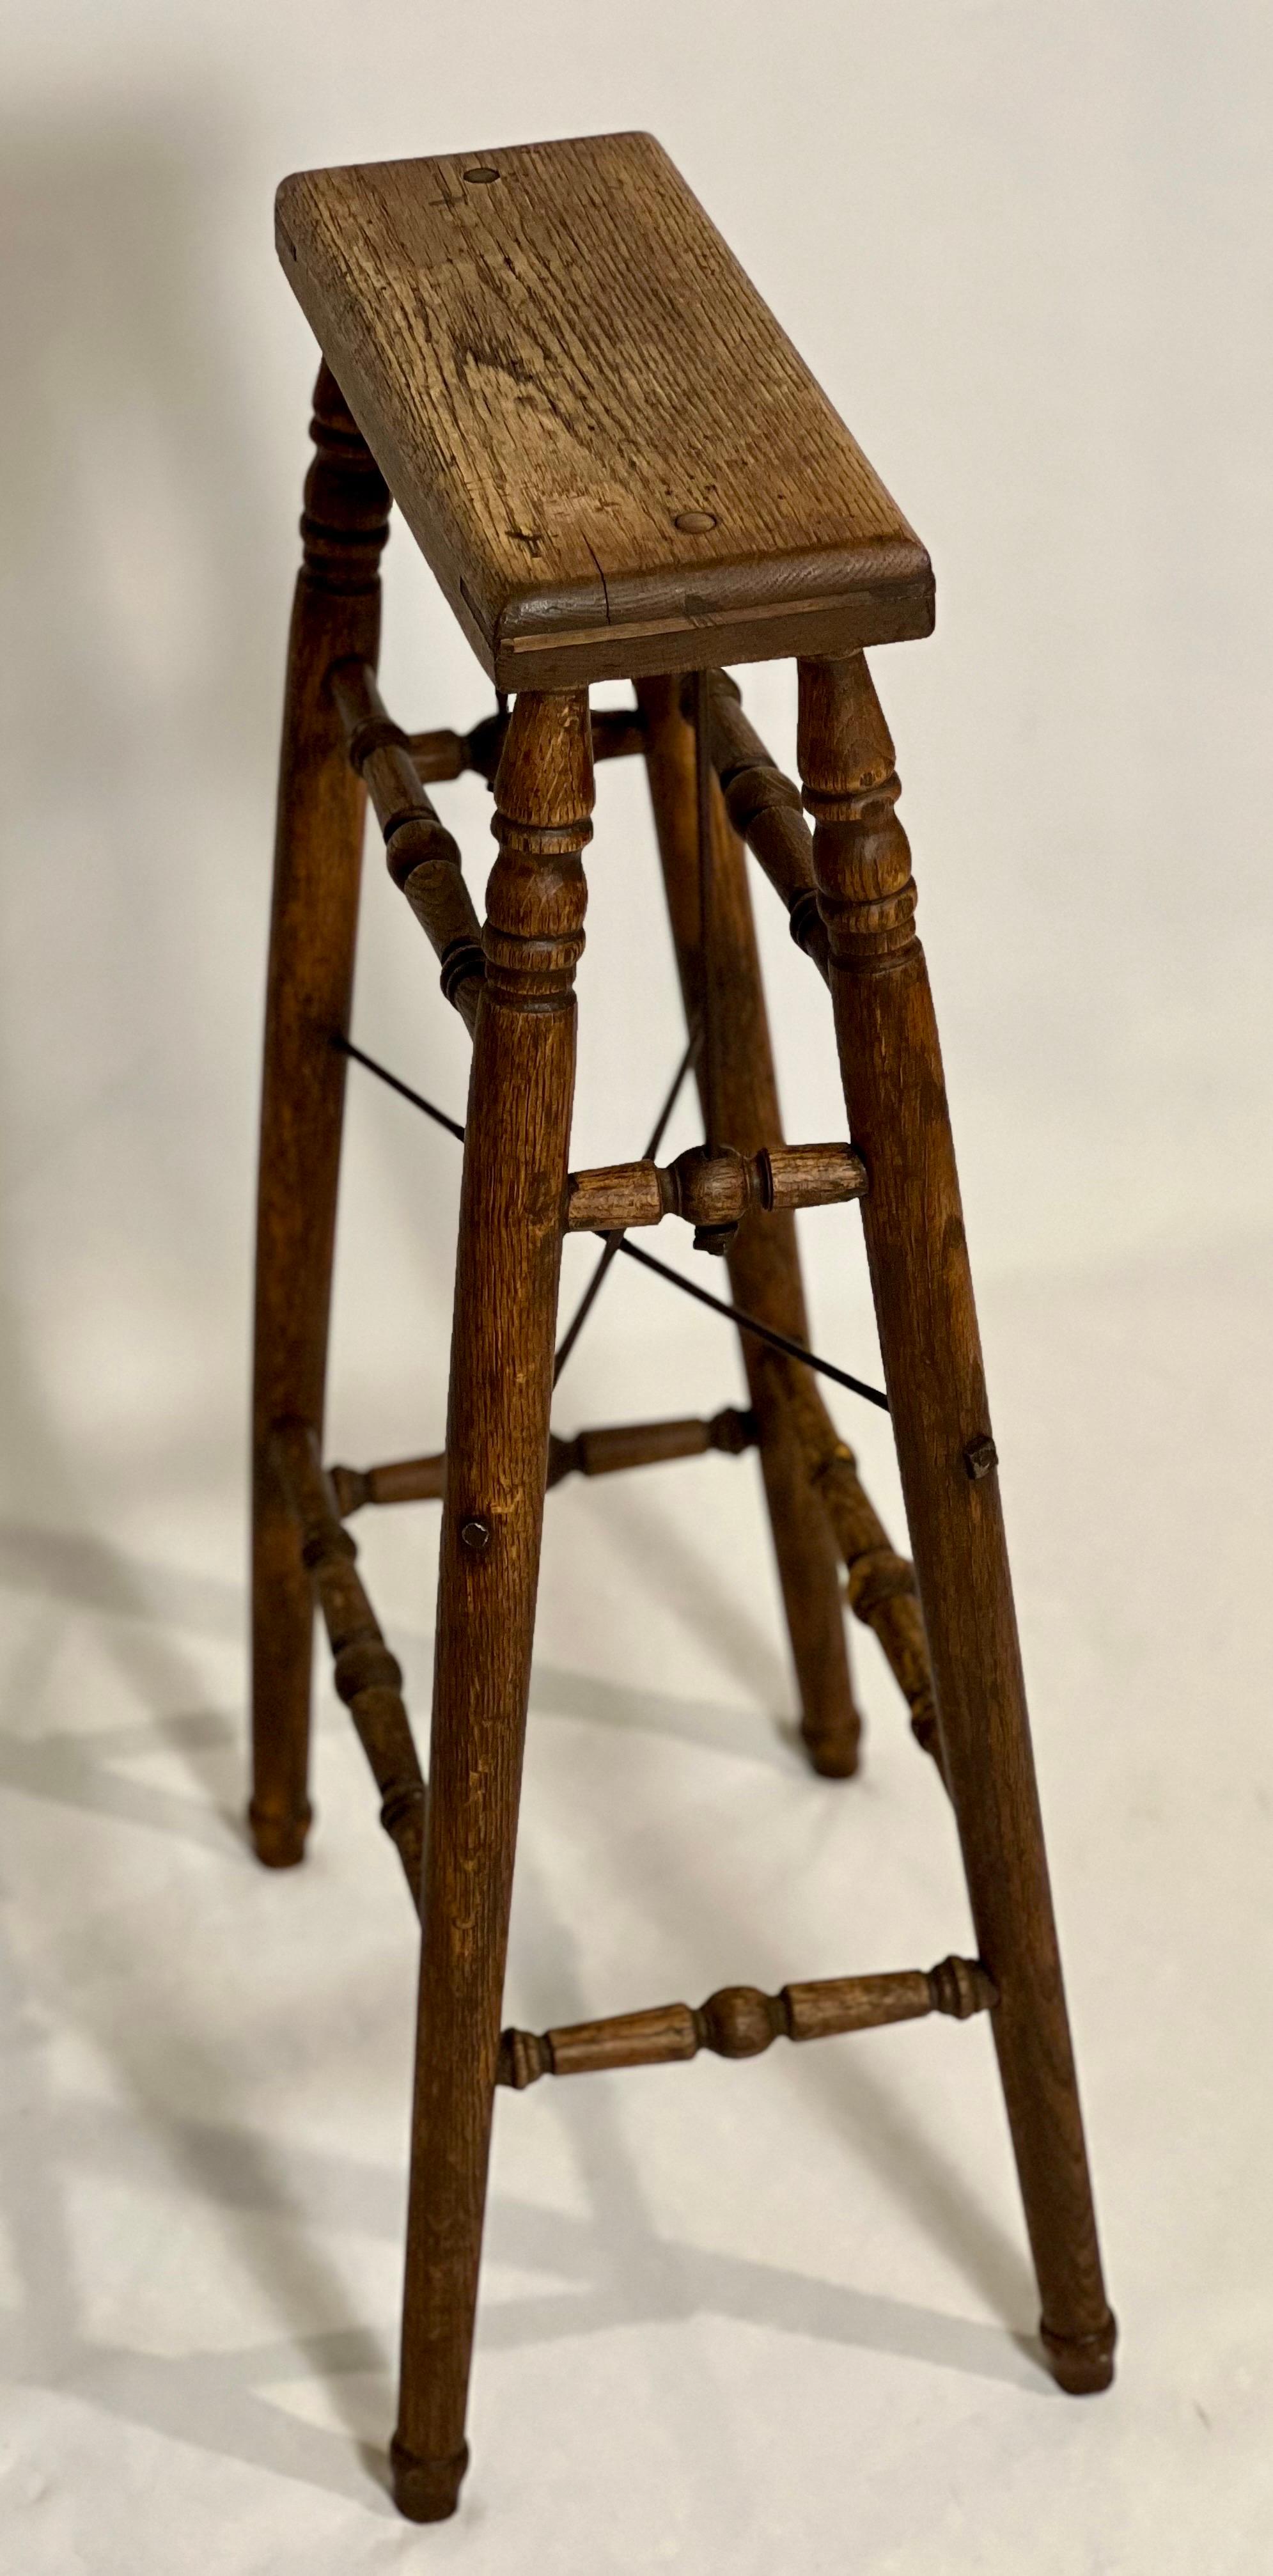 Rustic 19th Century French Turned Oak and Iron Artist's Stand or Stool